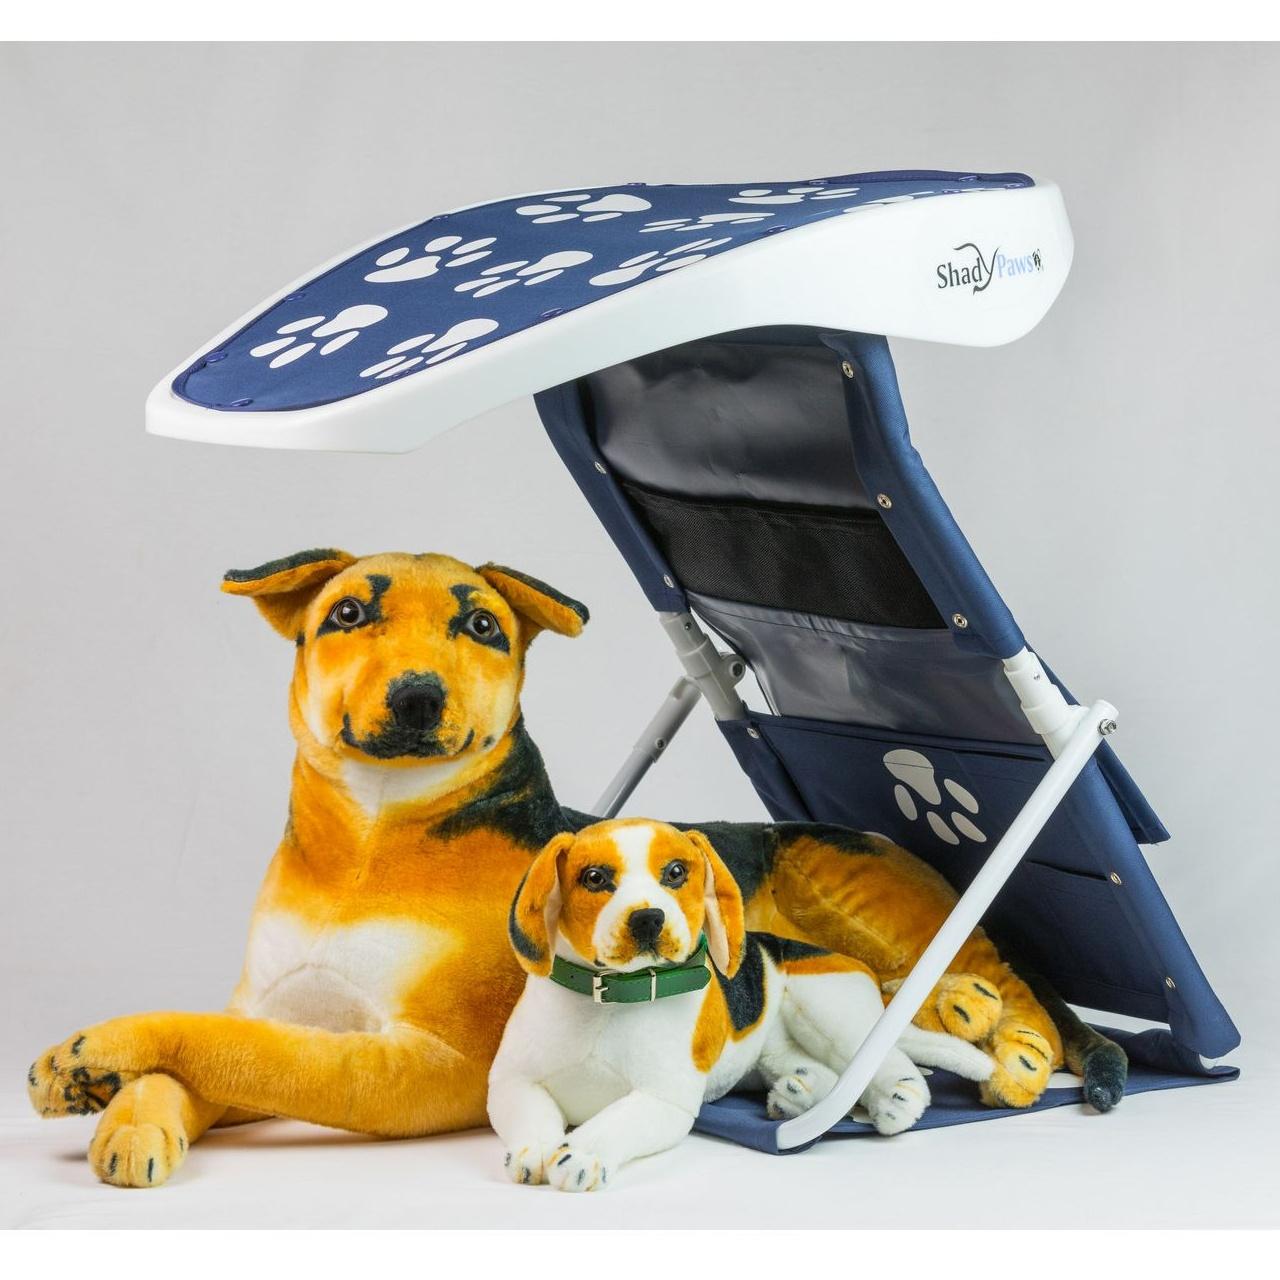 ShadyPaws Dog Shade - Captain Navy with White Paws